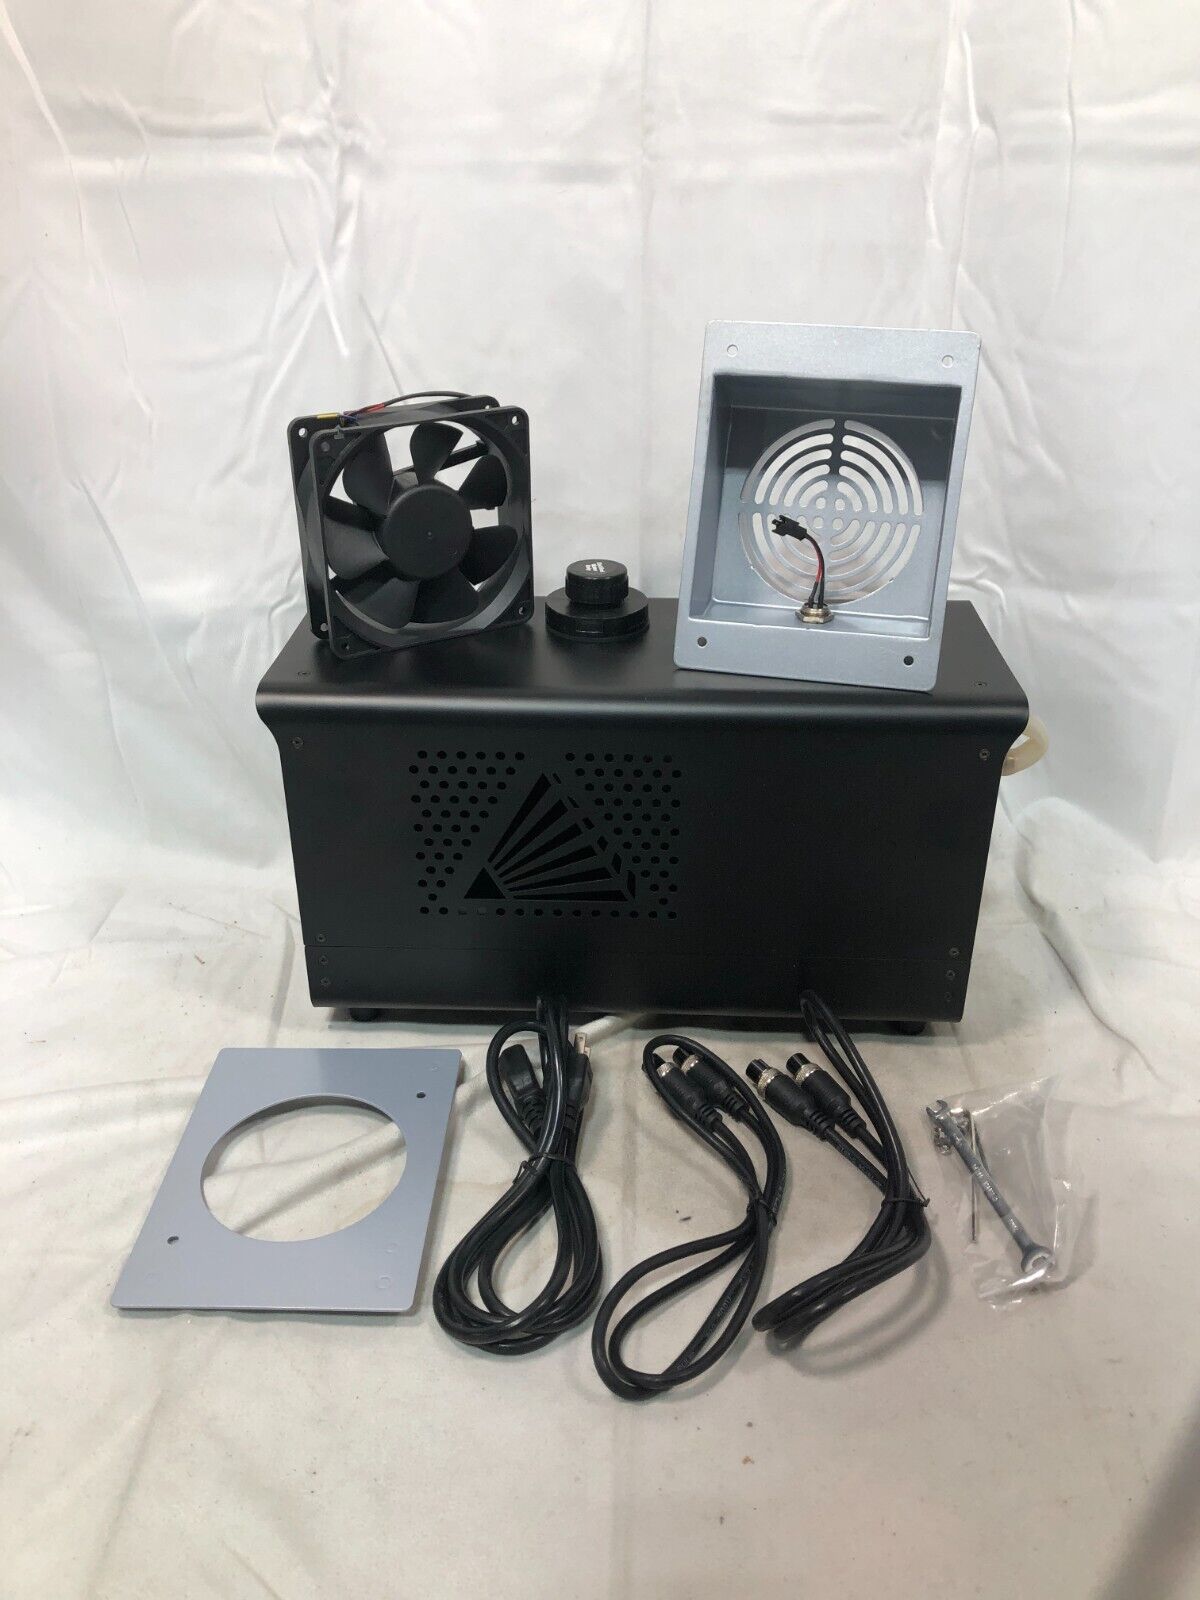 Full Spectrum Laser Muse Cool Box ~ Water-Cooling Accessory for Laser Cutter